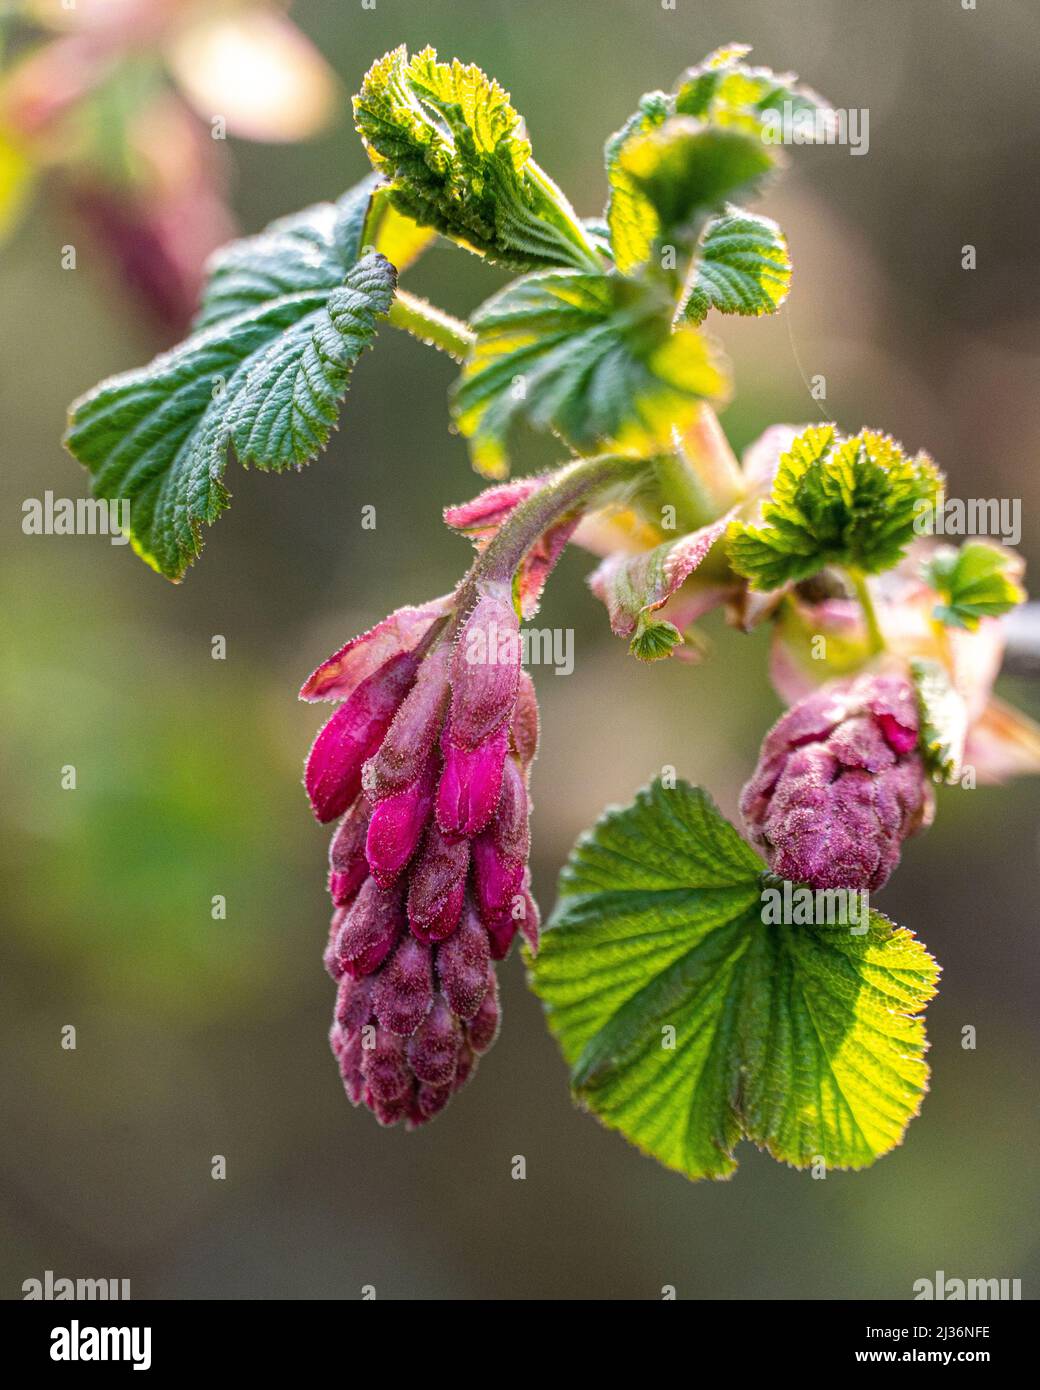 Pink flowers of the ornamental currant, Ribes sanguineum (Pursh, 1814). Belonging to the Grossulariaceae family. Denmark, Europe Stock Photo